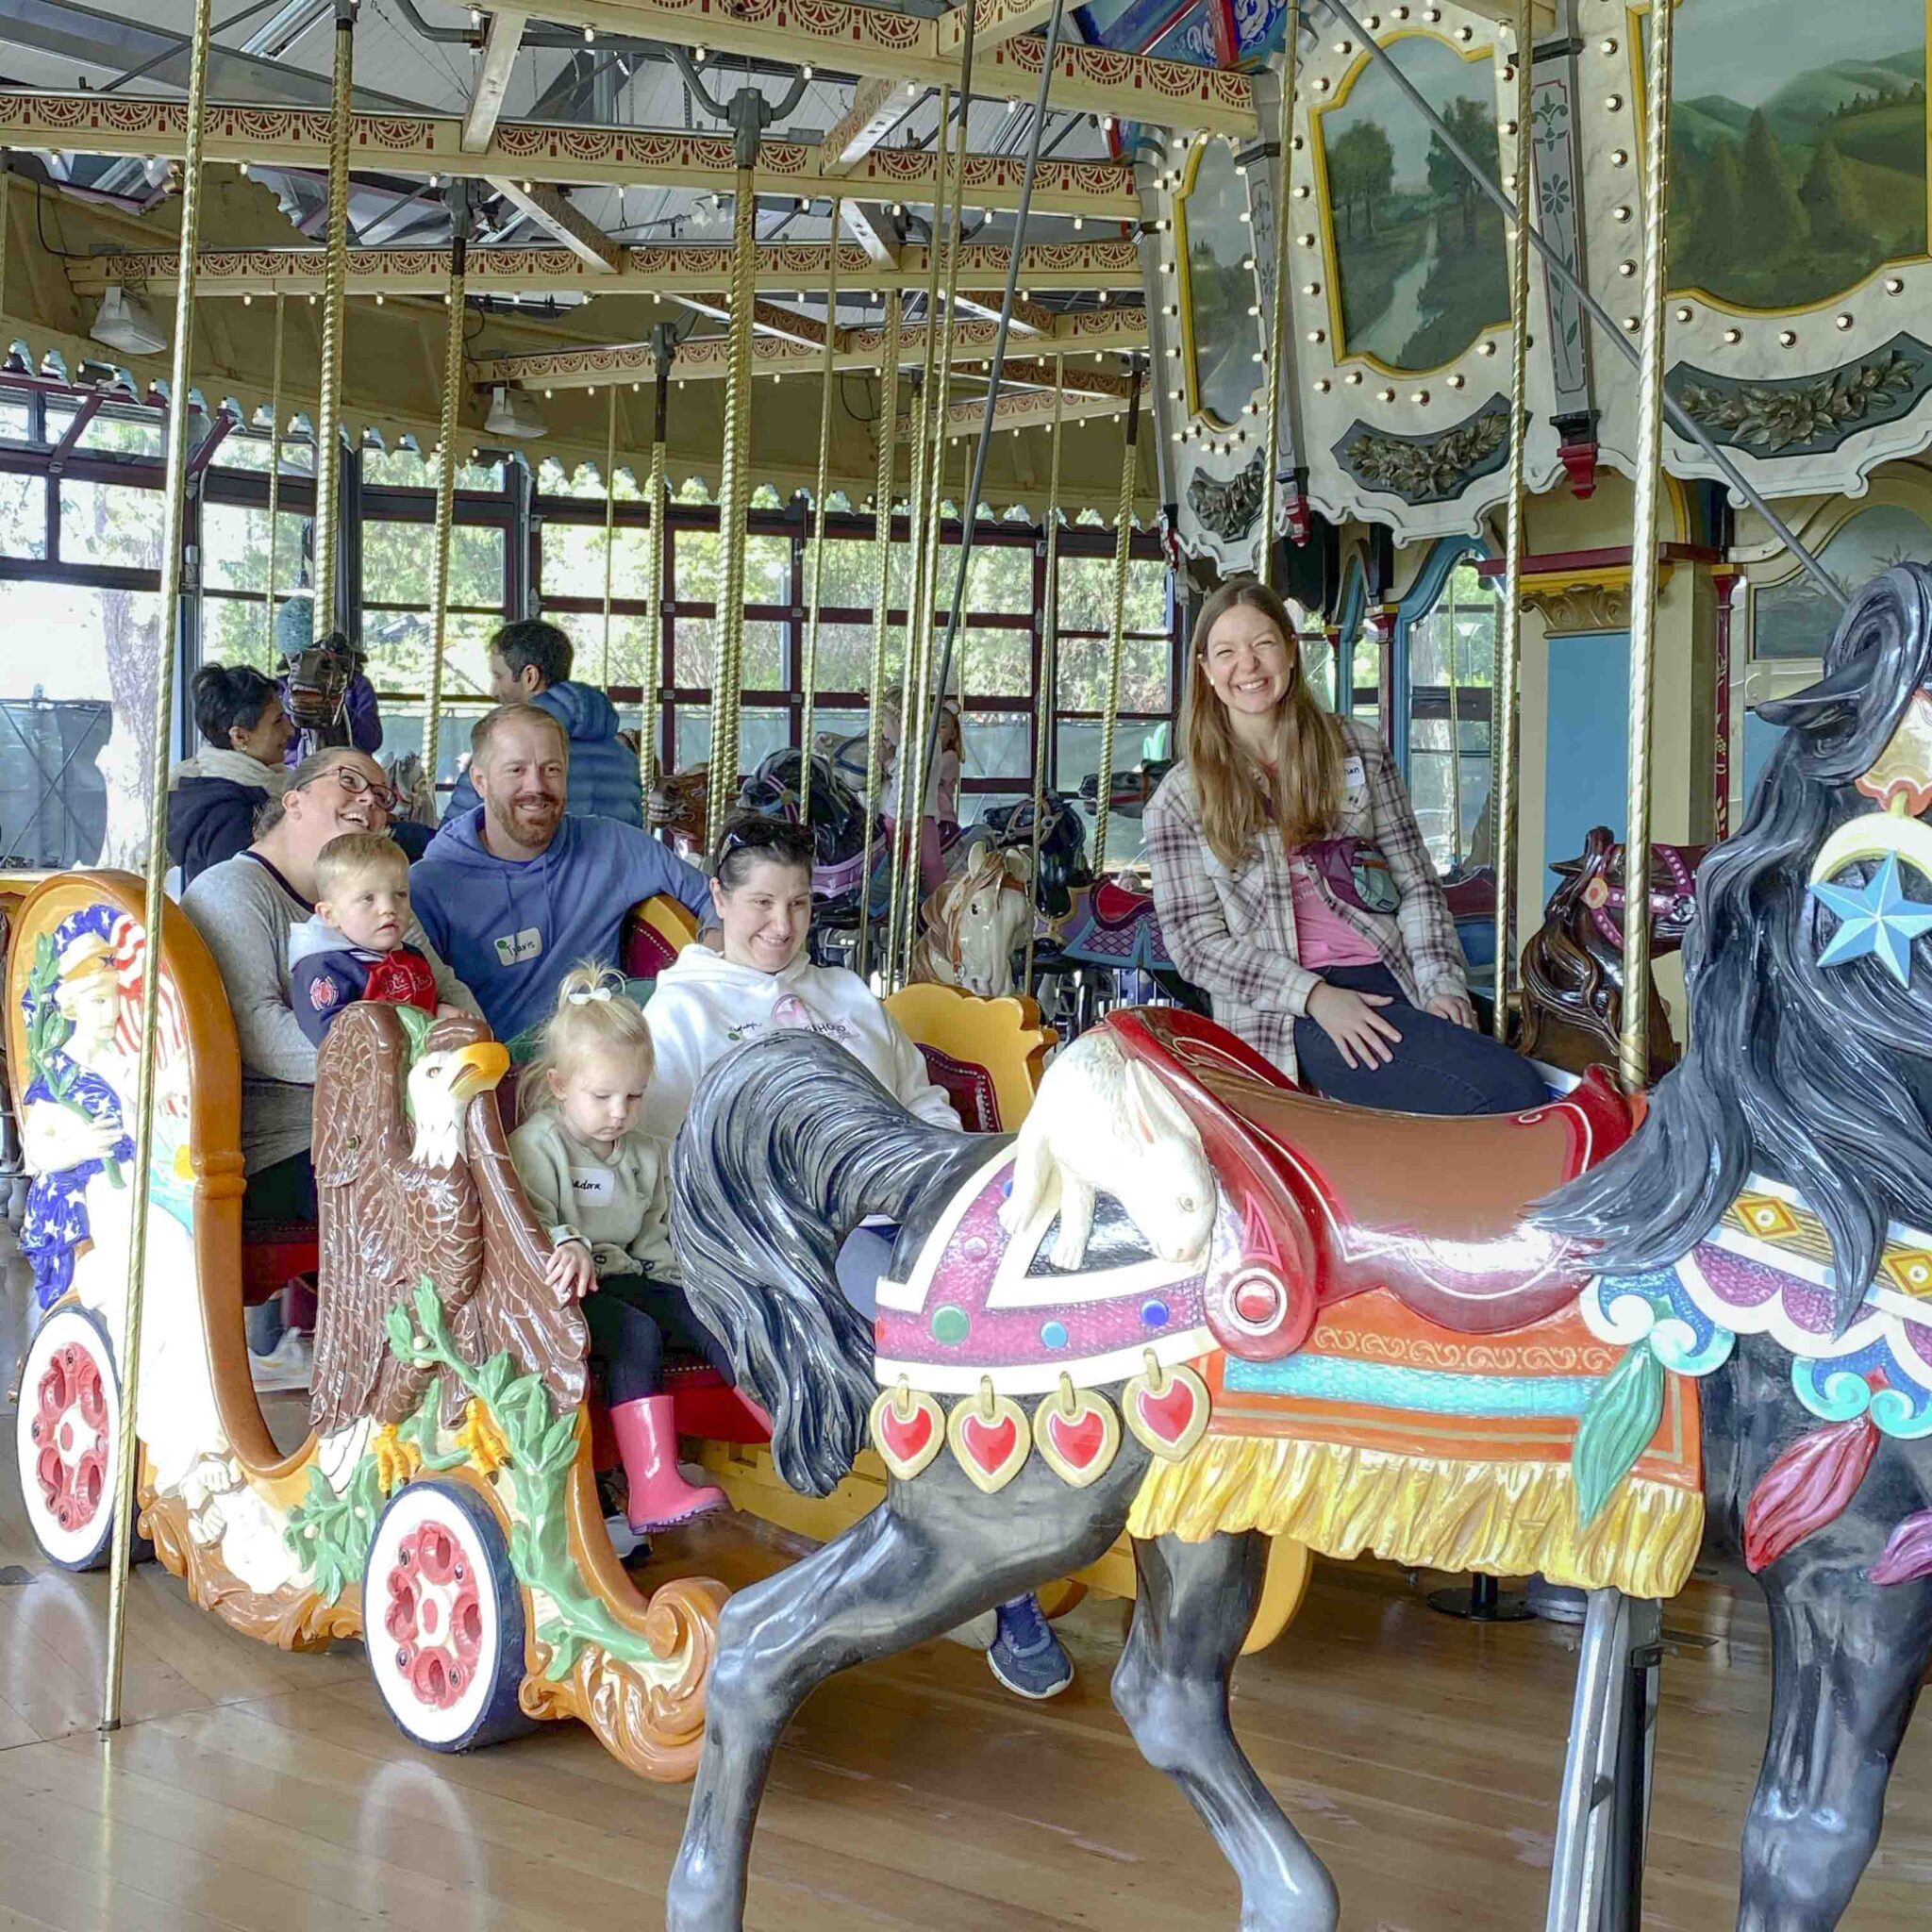 Two families ride carousel with B3 Provider, Meghan